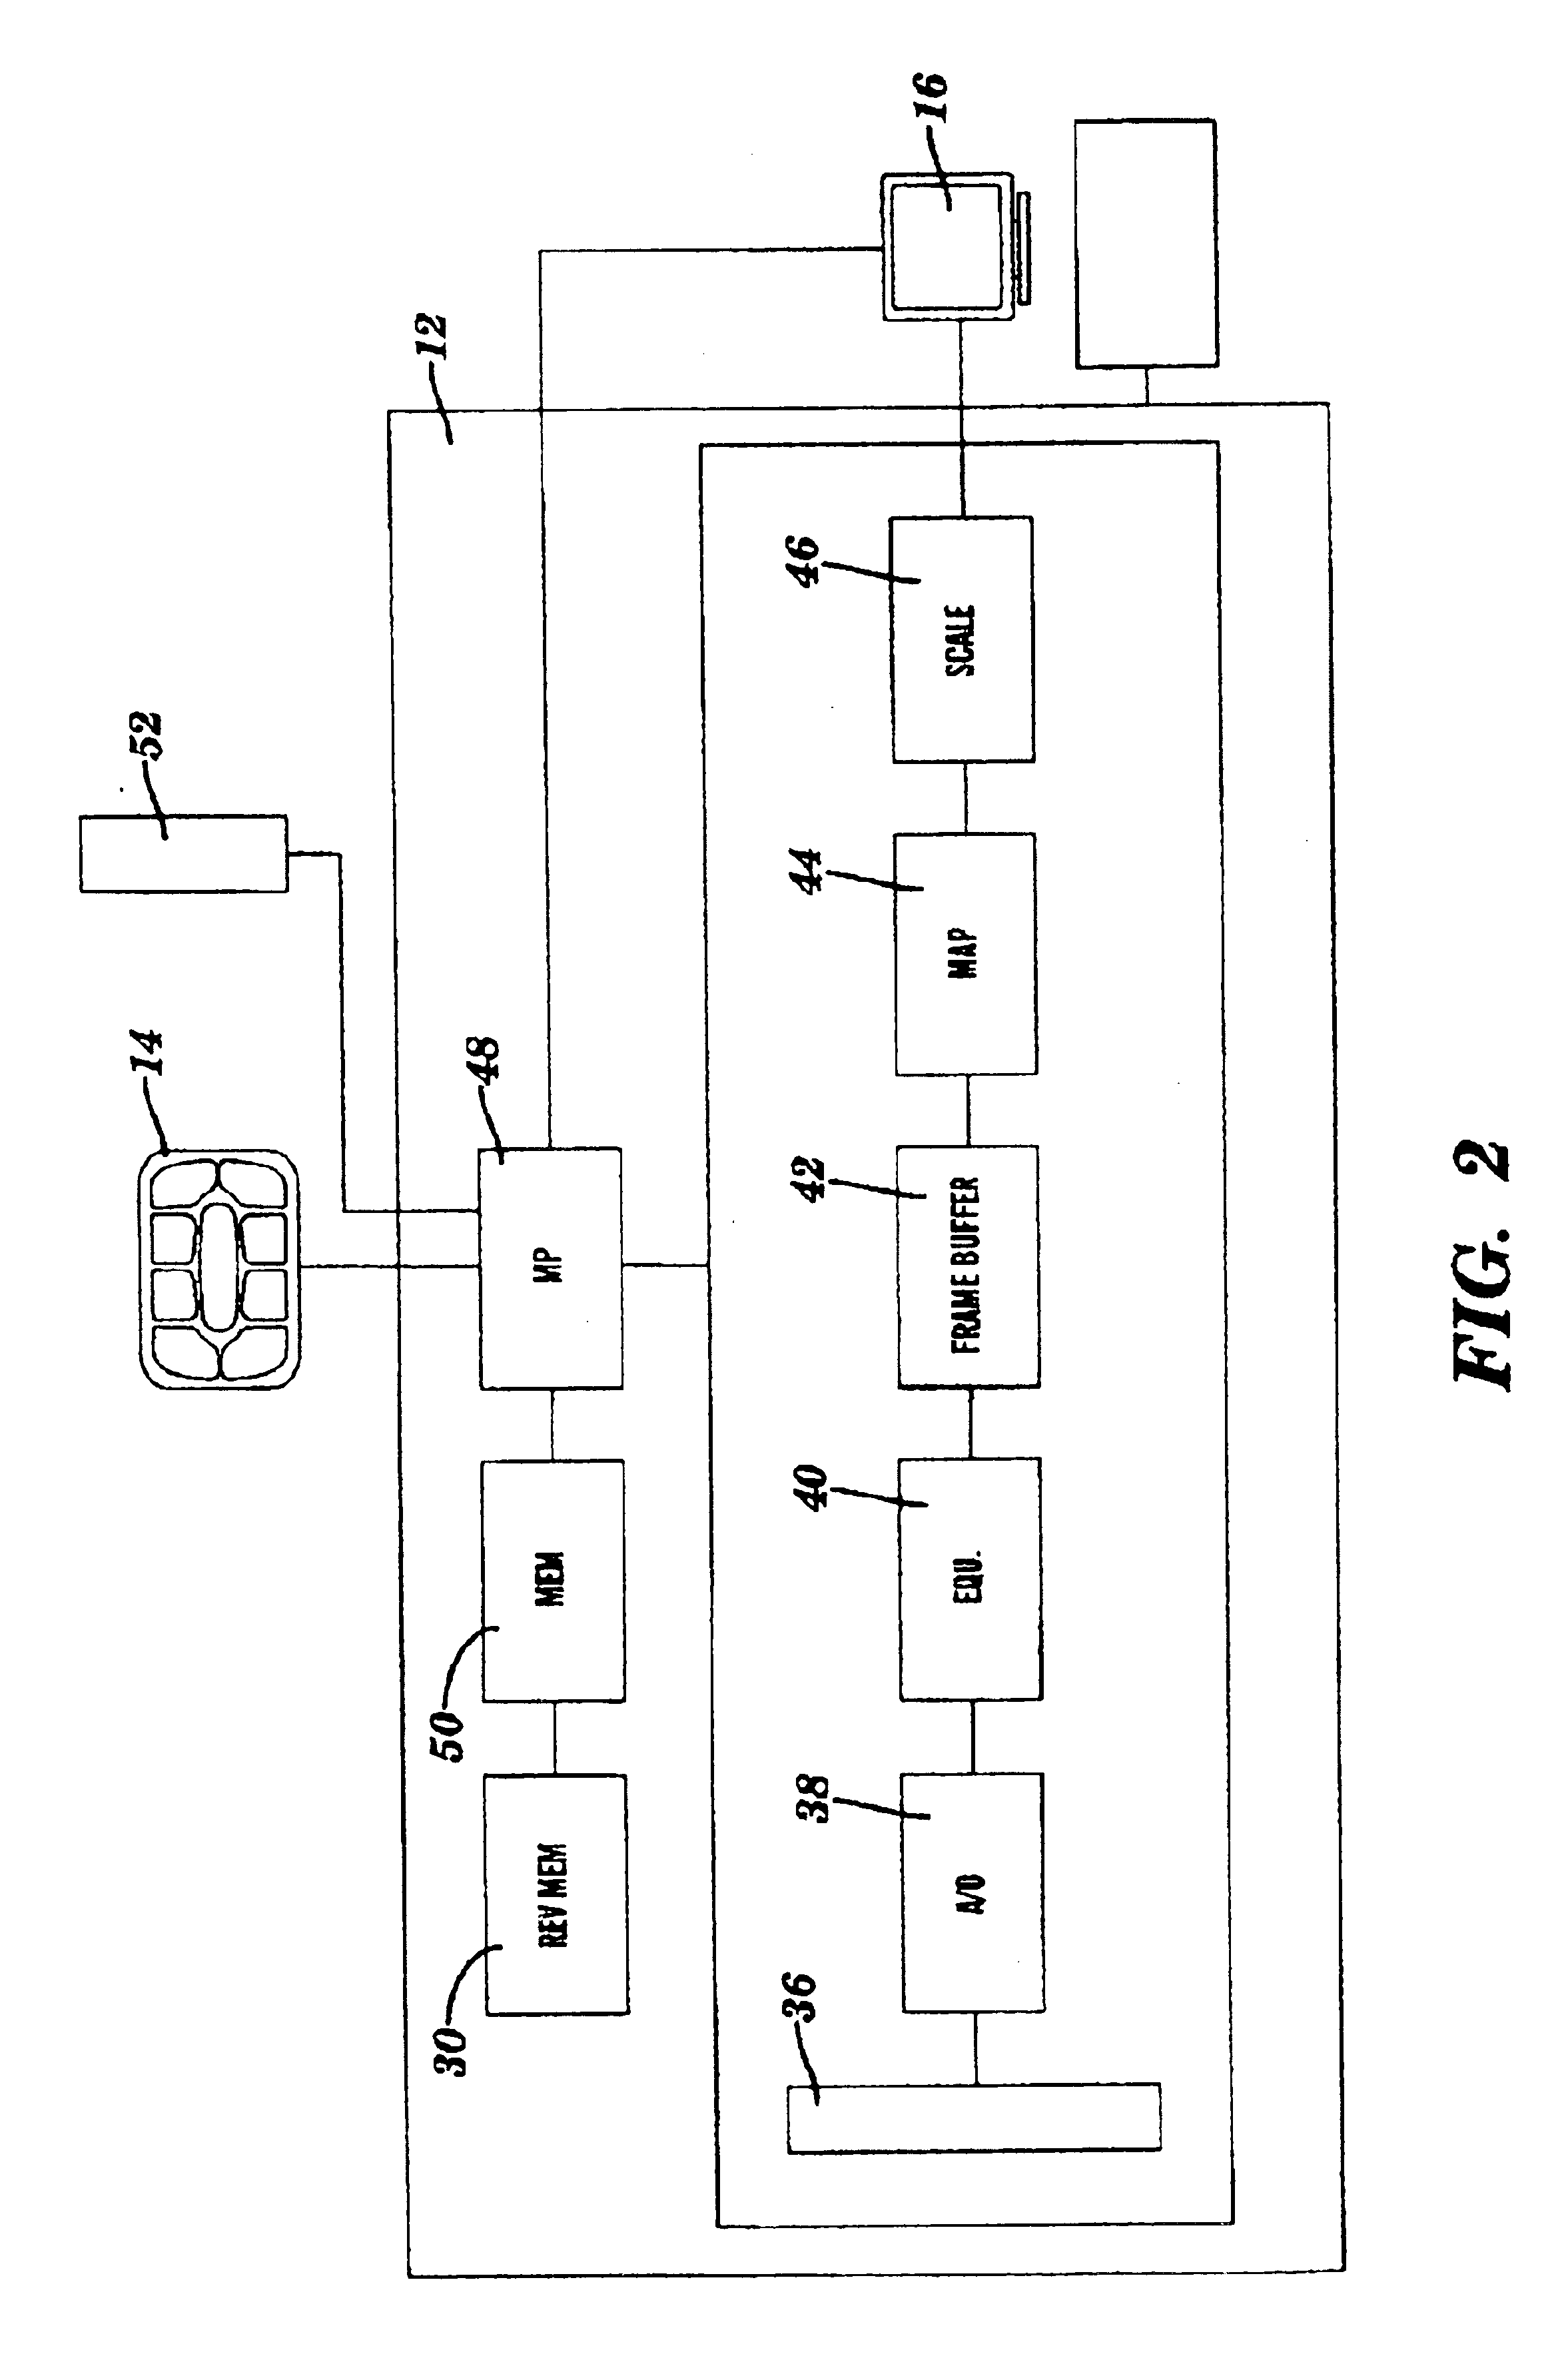 Method and apparatus for barcode selection of themographic survey images